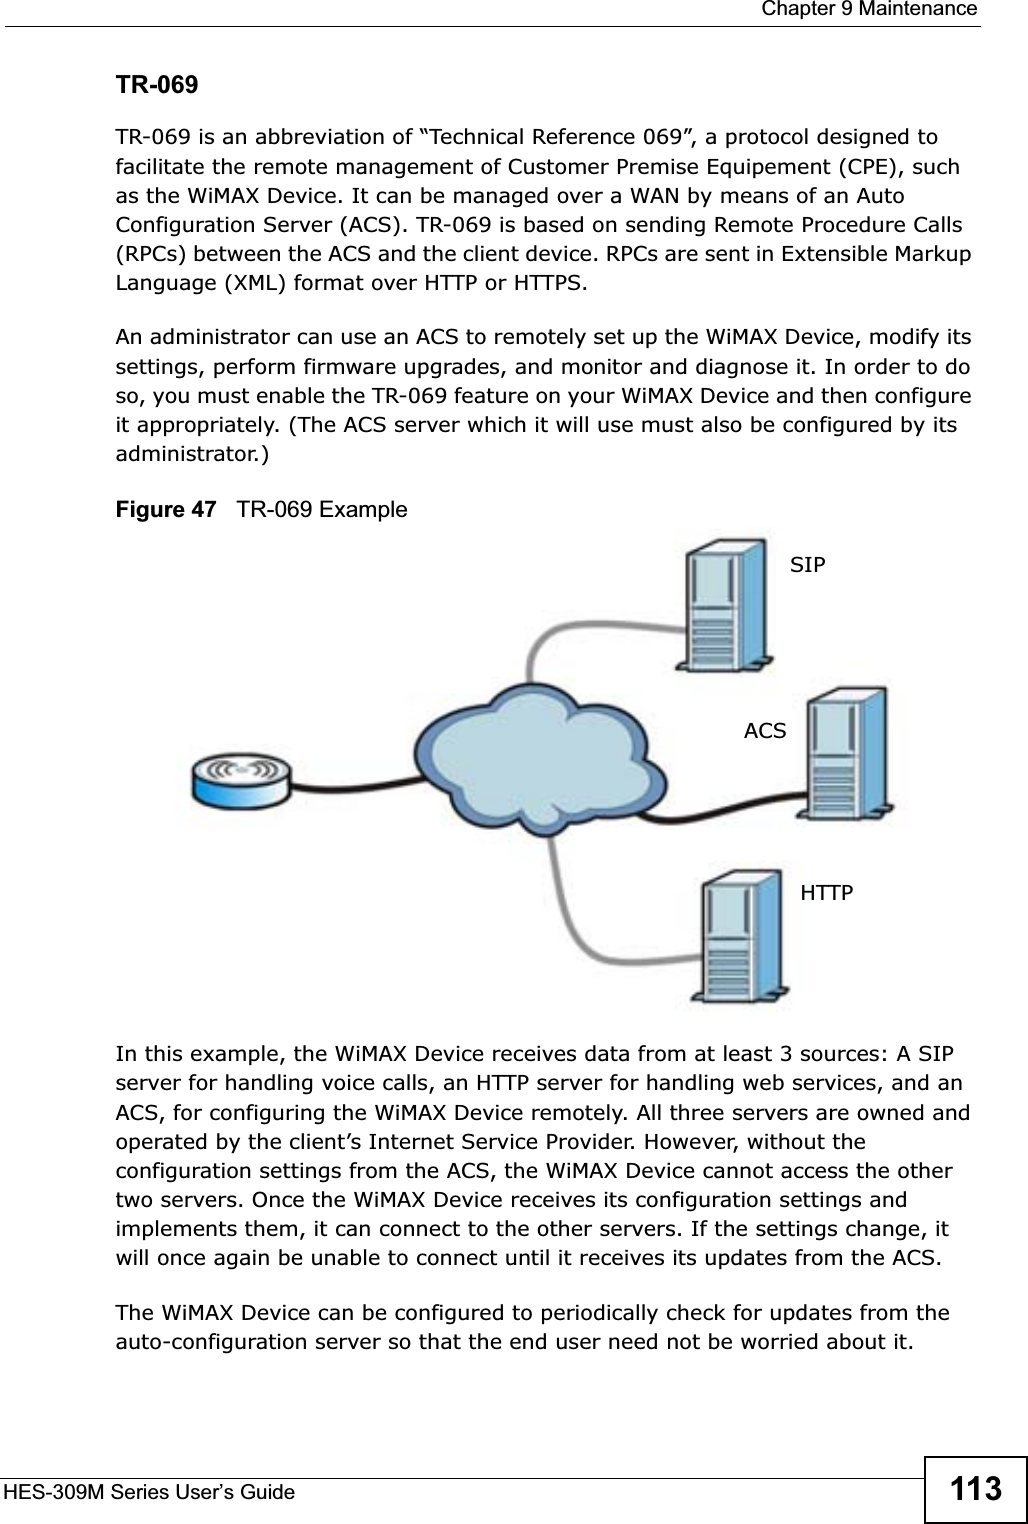  Chapter 9 MaintenanceHES-309M Series User’s Guide 113TR-069TR-069 is an abbreviation of “Technical Reference 069”, a protocol designed to facilitate the remote management of Customer Premise Equipement (CPE), such as the WiMAX Device. It can be managed over a WAN by means of an Auto Configuration Server (ACS). TR-069 is based on sending Remote Procedure Calls (RPCs) between the ACS and the client device. RPCs are sent in Extensible Markup Language (XML) format over HTTP or HTTPS. An administrator can use an ACS to remotely set up the WiMAX Device, modify its settings, perform firmware upgrades, and monitor and diagnose it. In order to do so, you must enable the TR-069 feature on your WiMAX Device and then configure it appropriately. (The ACS server which it will use must also be configured by its administrator.)Figure 47   TR-069 ExampleIn this example, the WiMAX Device receives data from at least 3 sources: A SIP server for handling voice calls, an HTTP server for handling web services, and an ACS, for configuring the WiMAX Device remotely. All three servers are owned and operated by the client’s Internet Service Provider. However, without the configuration settings from the ACS, the WiMAX Device cannot access the other two servers. Once the WiMAX Device receives its configuration settings and implements them, it can connect to the other servers. If the settings change, it will once again be unable to connect until it receives its updates from the ACS.The WiMAX Device can be configured to periodically check for updates from the auto-configuration server so that the end user need not be worried about it.SIPACSHTTP